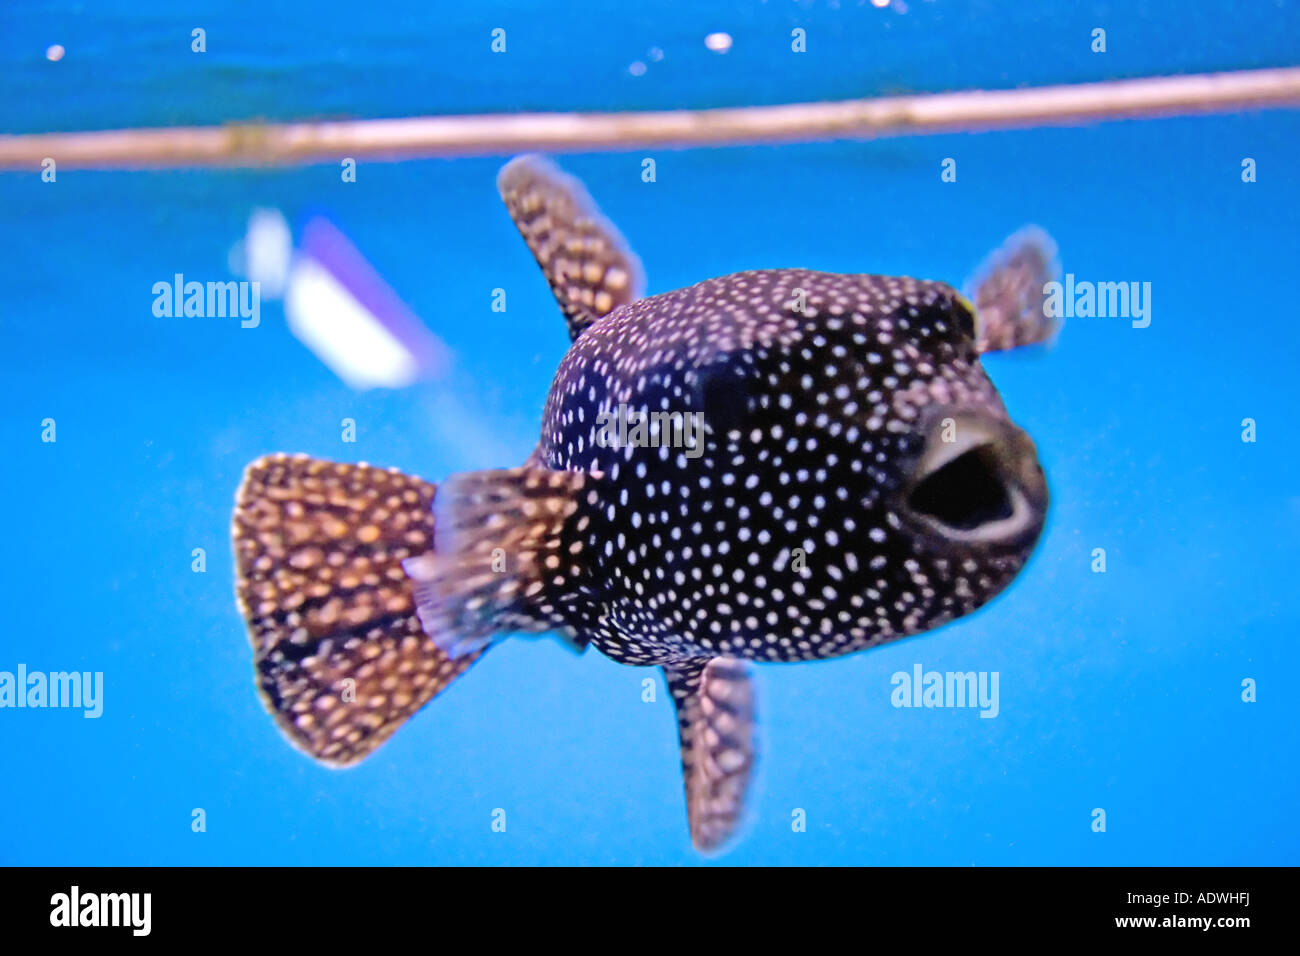 A curious spotted boxfish comes up to the aquarium glass. Stock Photo